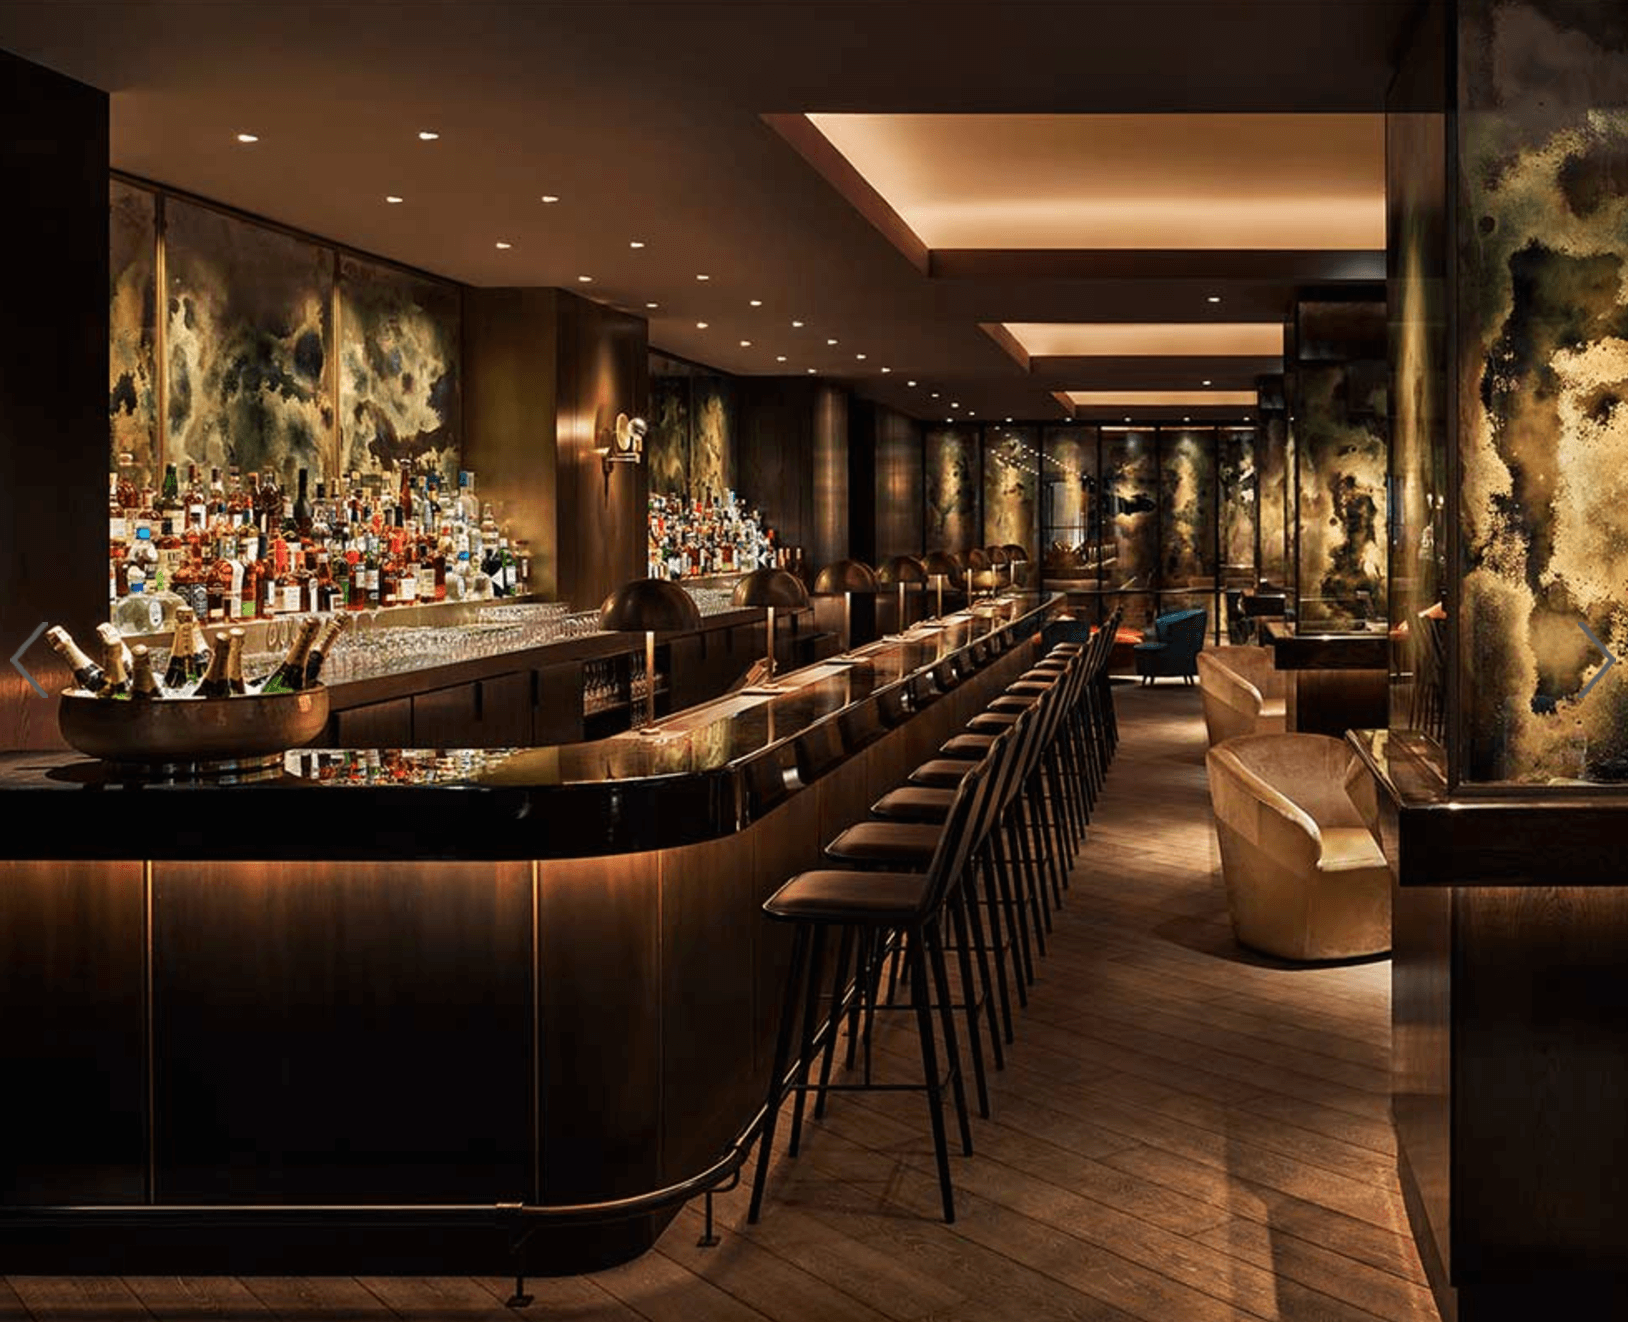 engagement party ideas for a party at the elegant and glamorous New York 11 Howard hotel bar interior